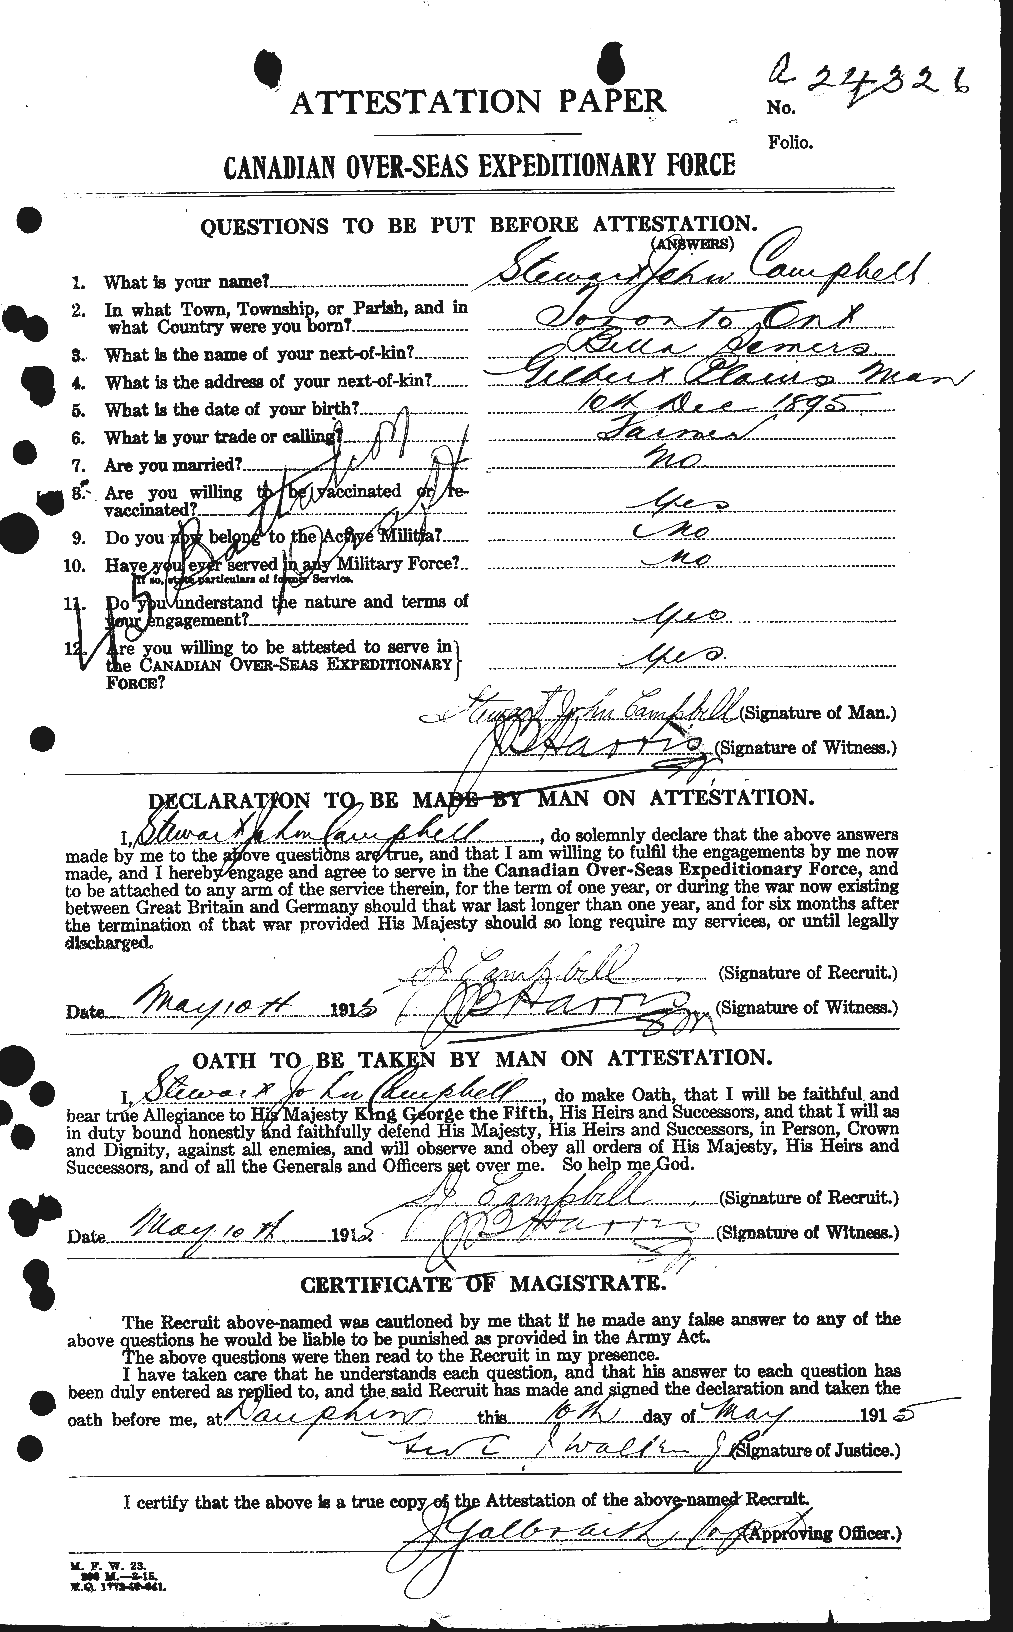 Personnel Records of the First World War - CEF 003993a